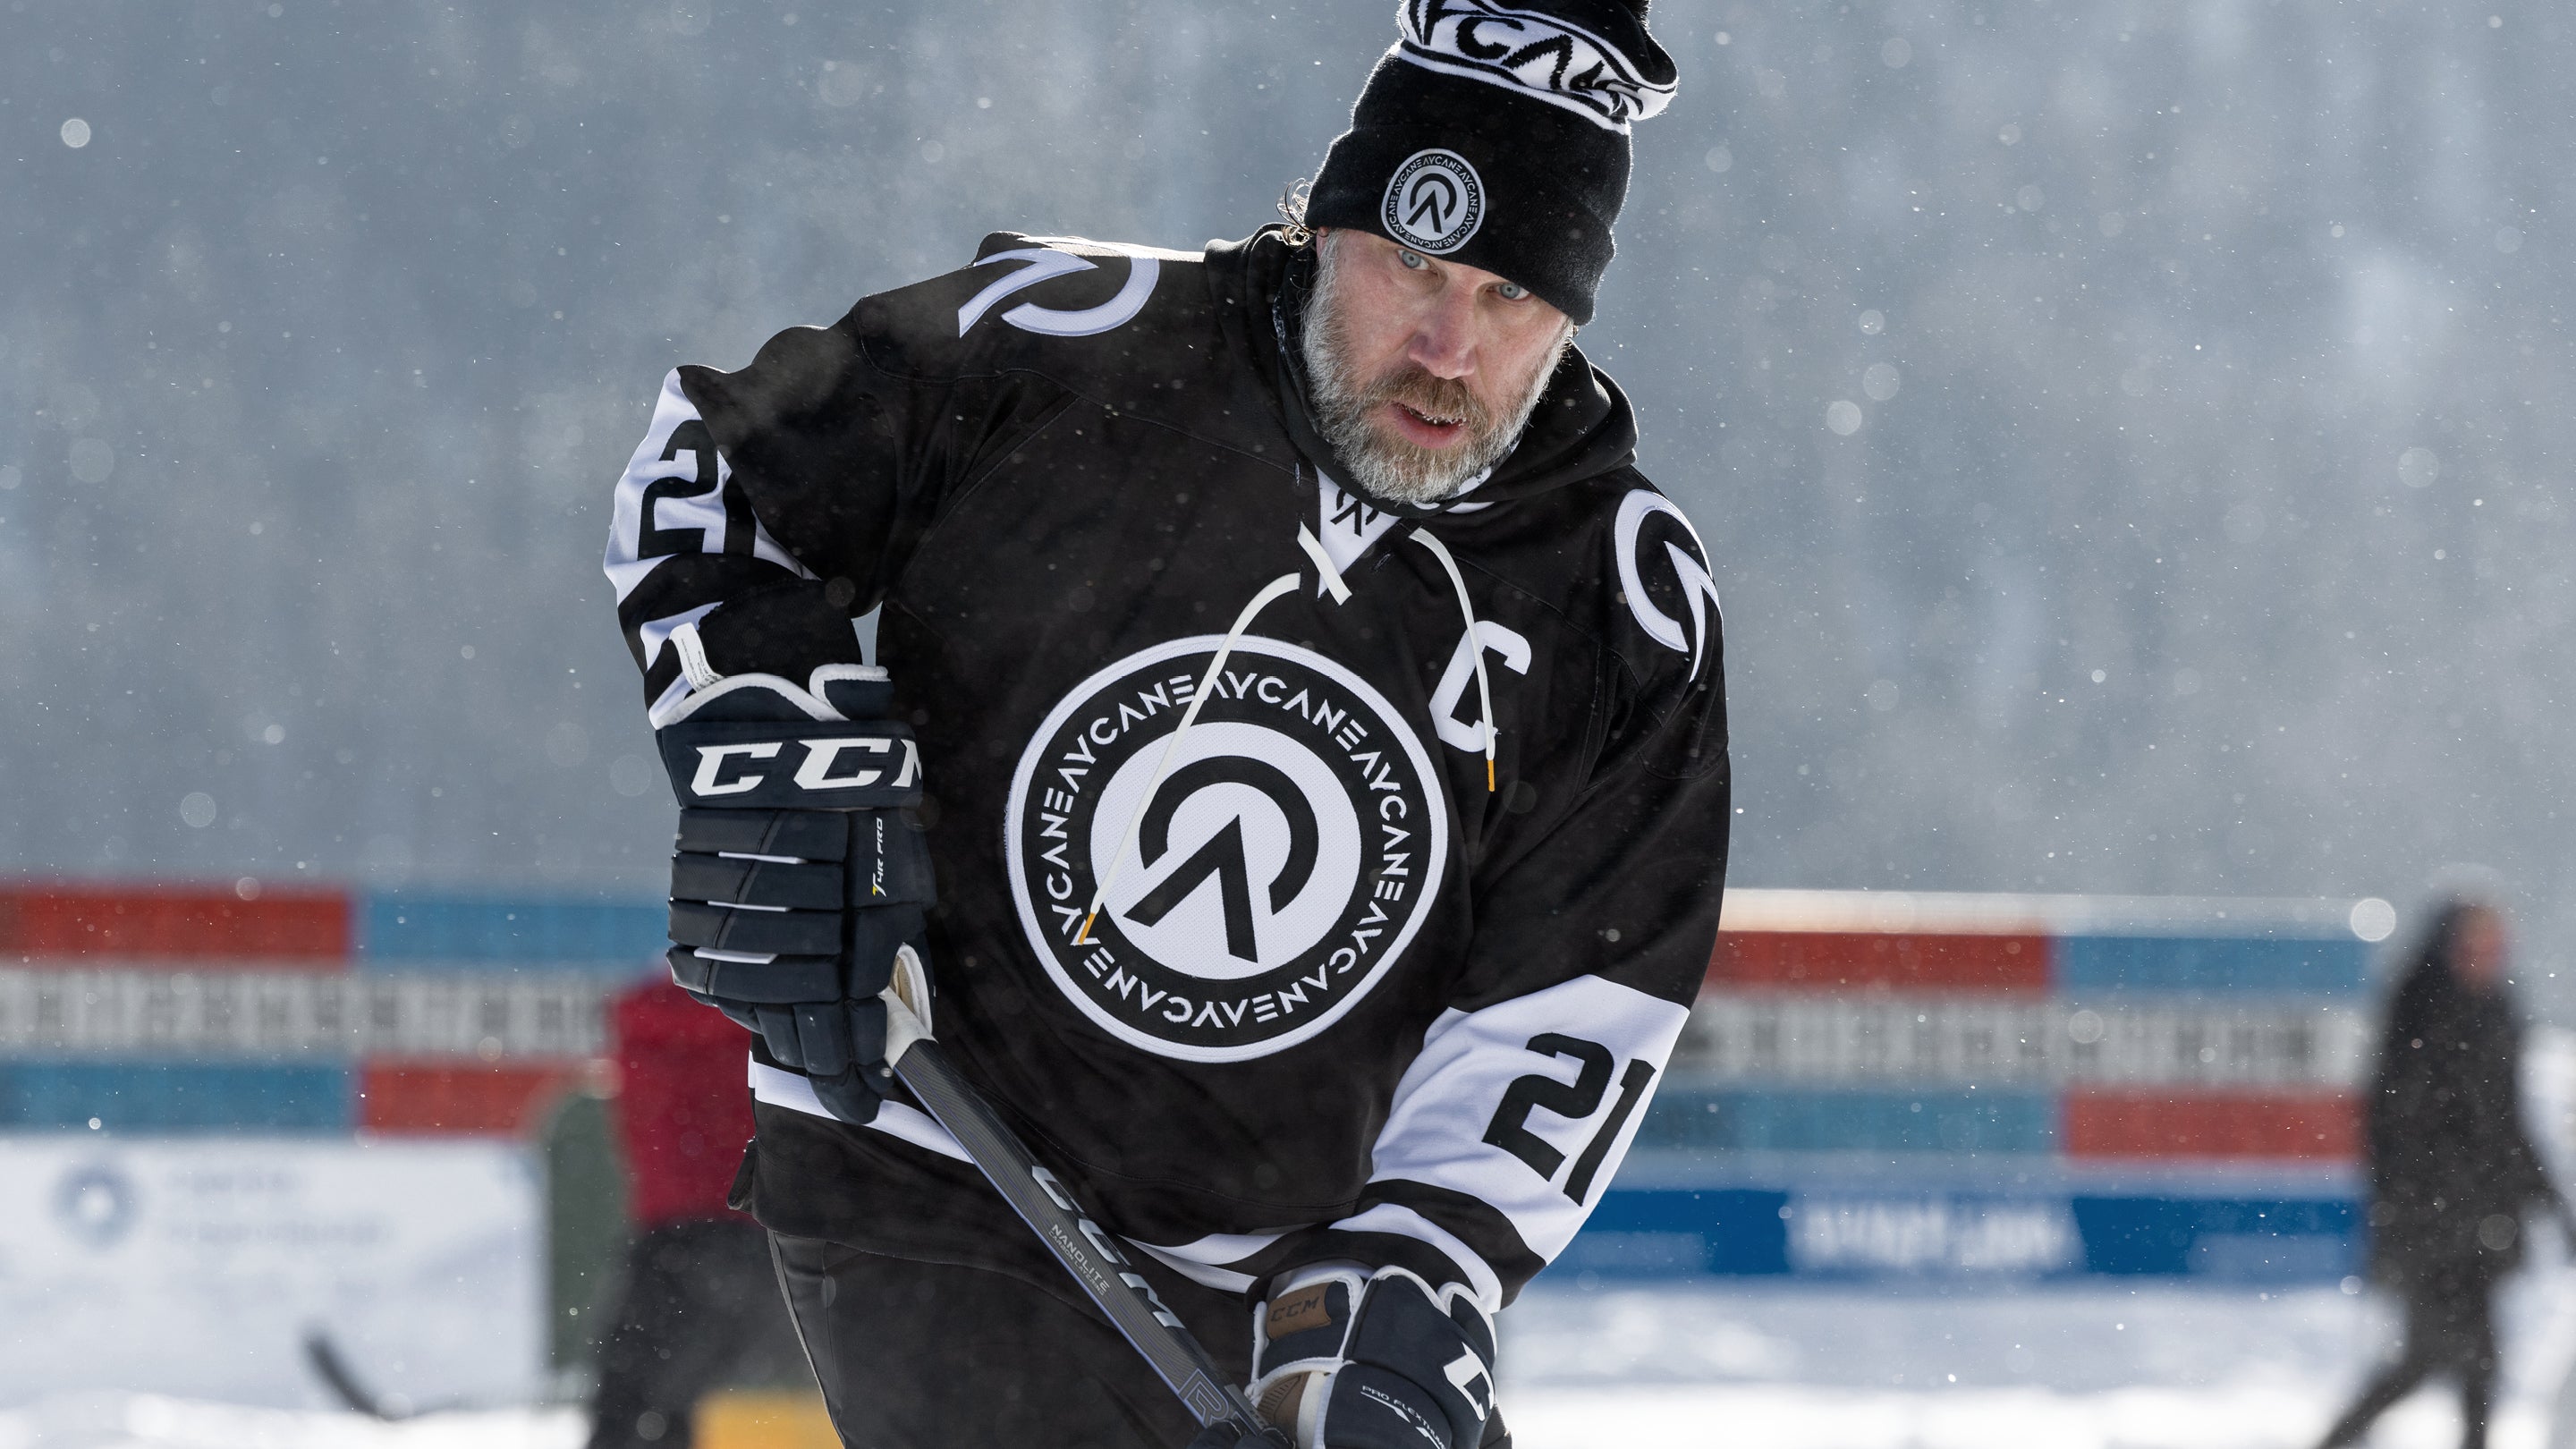 Peter Forsberg Pond Hockey Jersey Competition